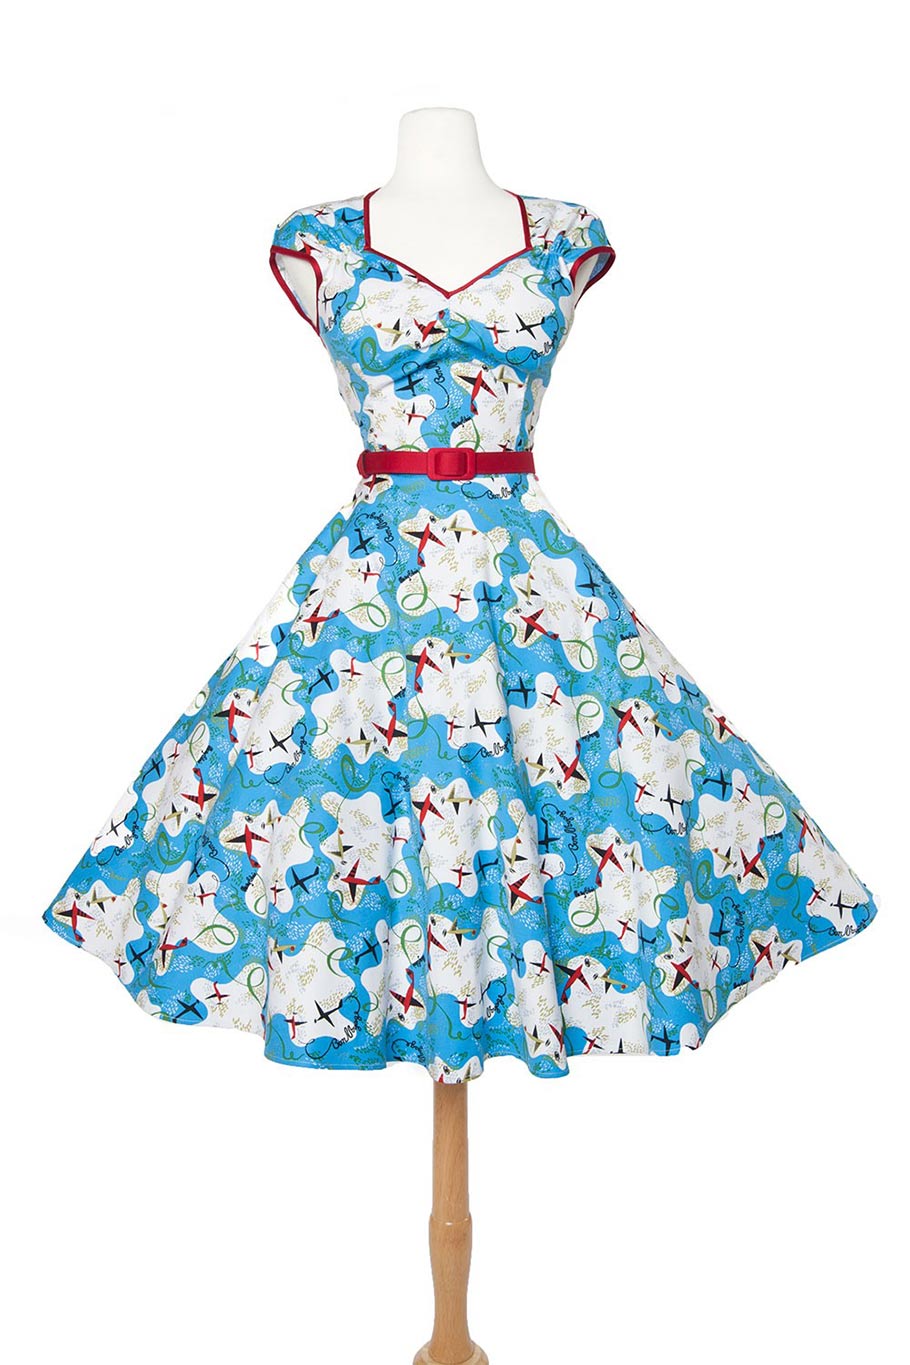 Heidi dress in planes print. (Click to enlarge.)